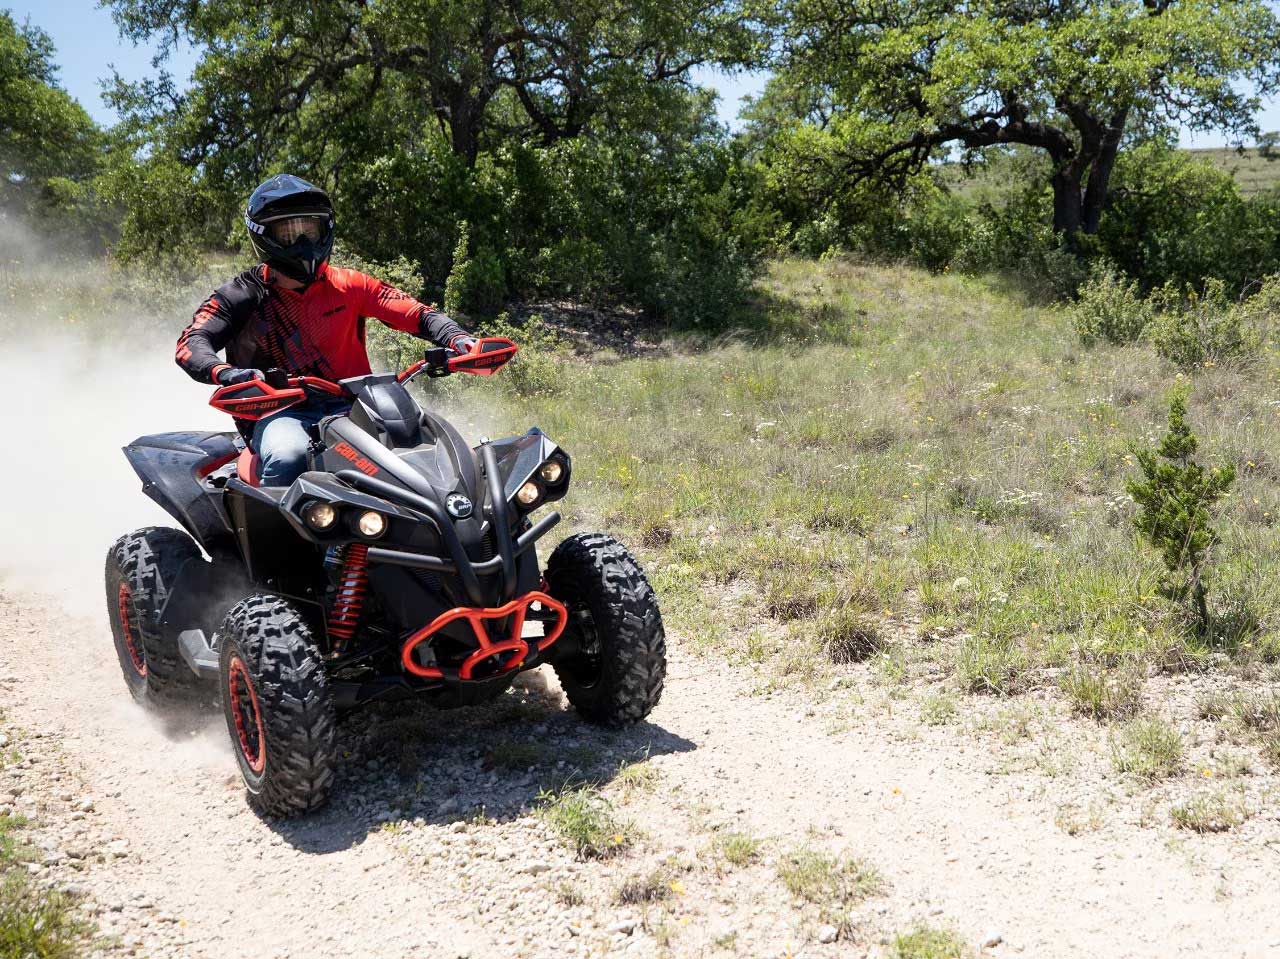 renegade-xxc-1000r-black-canam-red-trail-roost-front-view-3-4-3.jpg